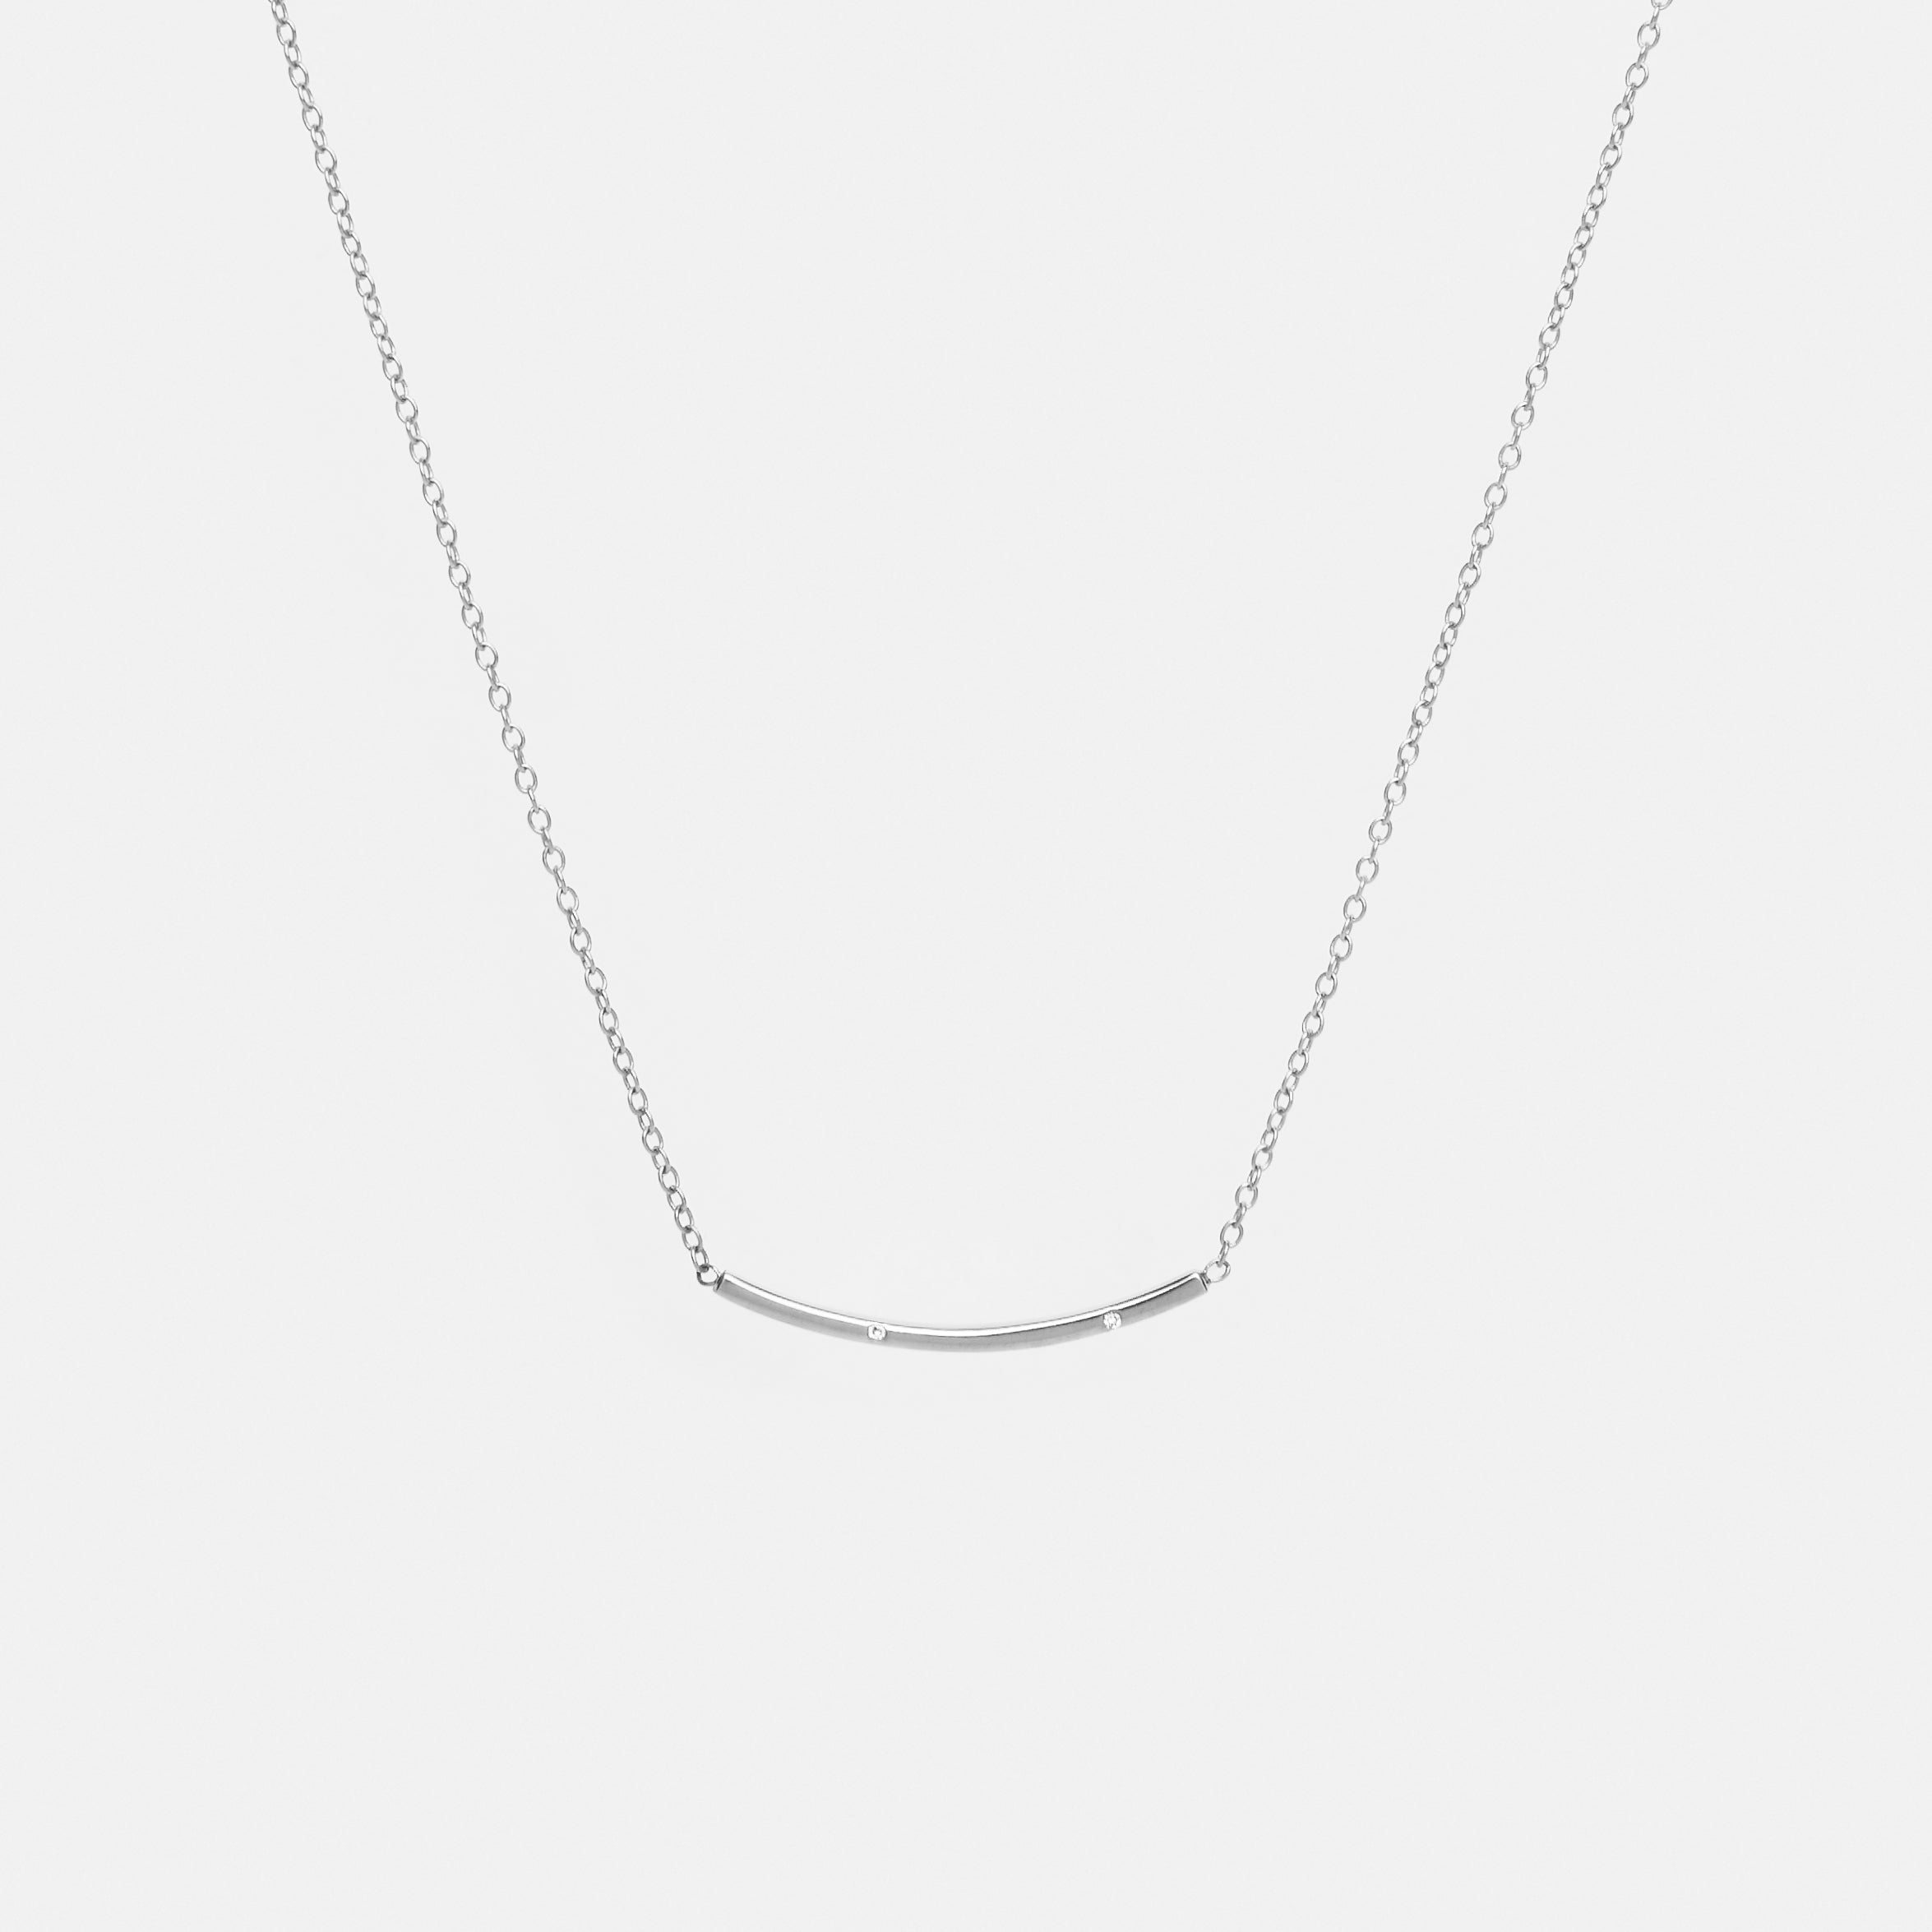 Sara Thin Necklace in 14k Gold set with White Diamonds By SHW Fine Jewelry NYC